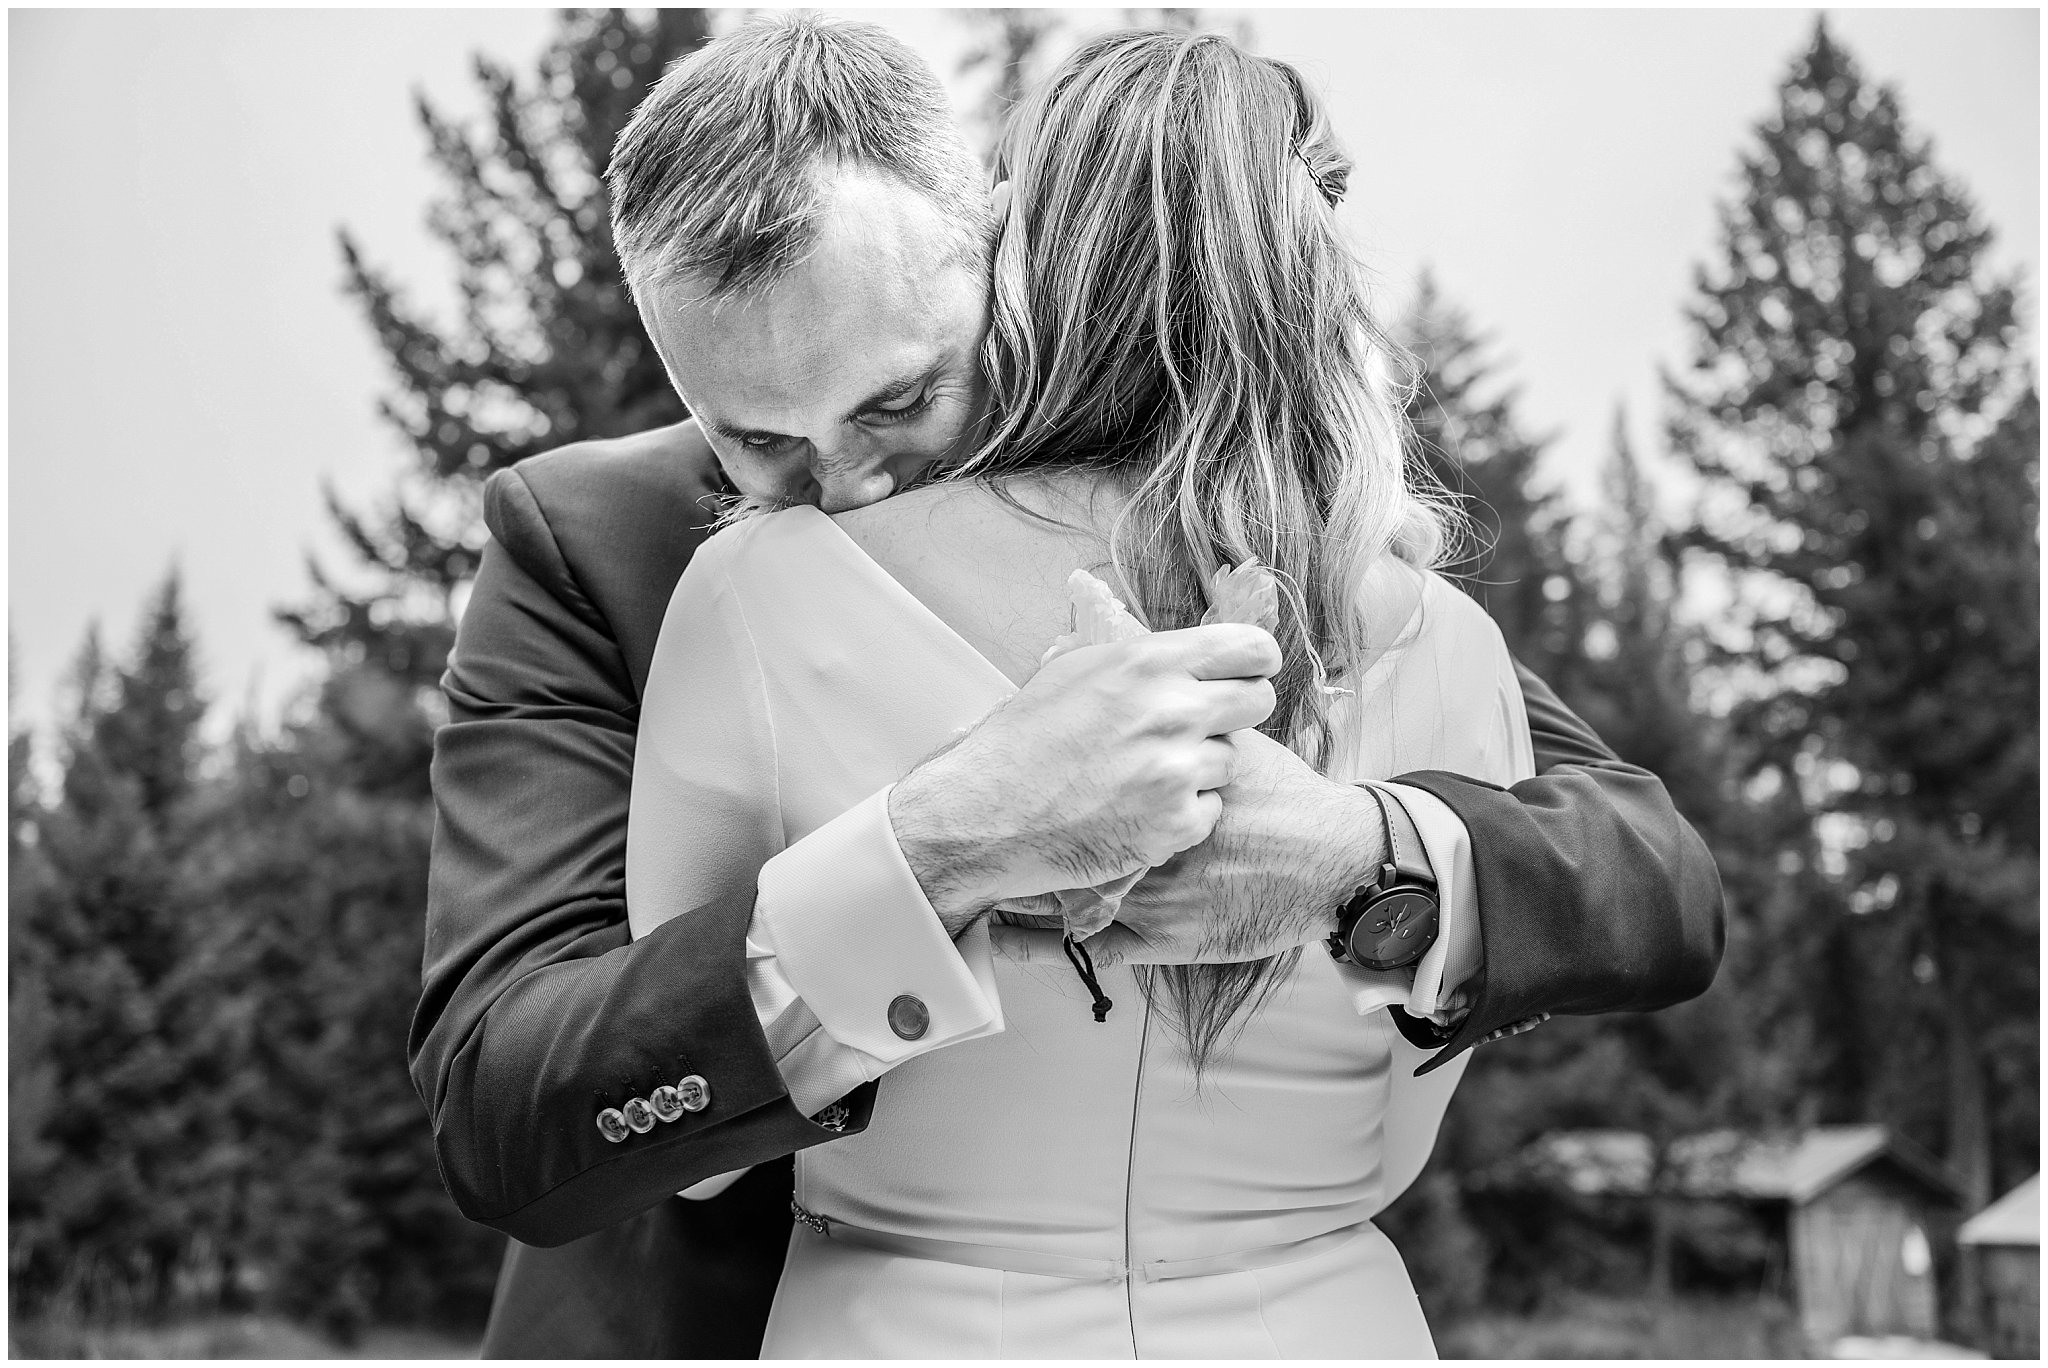 Bride and groom in exchange gifts and have first look in the forest of Montana by a pond | Mountainside Weddings Kalispell Montana Destination Wedding | Jessie and Dallin Photography